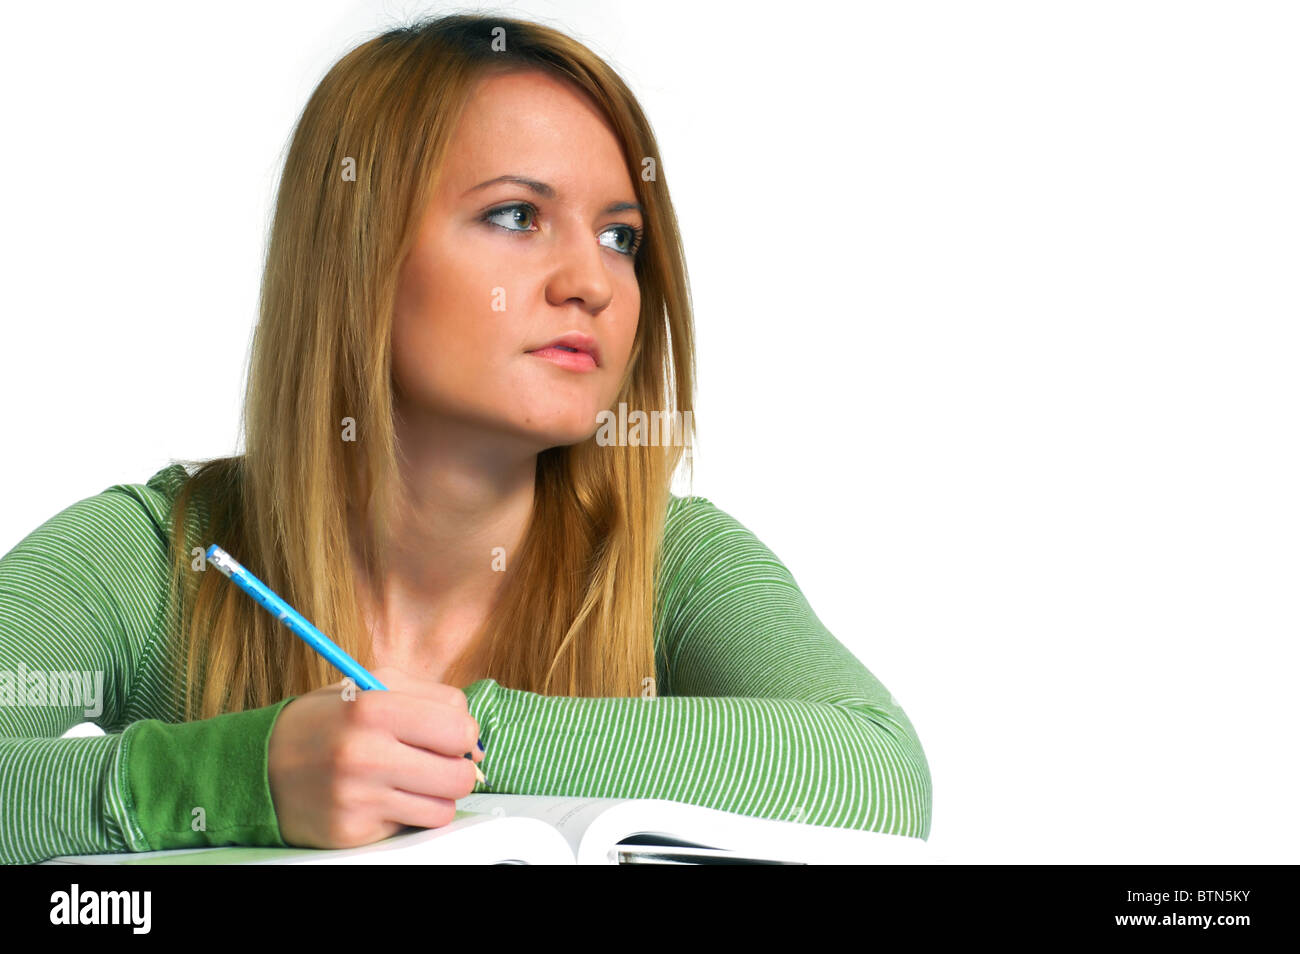 Portrait of a beautiful young female student, holding pencil Stock Photo